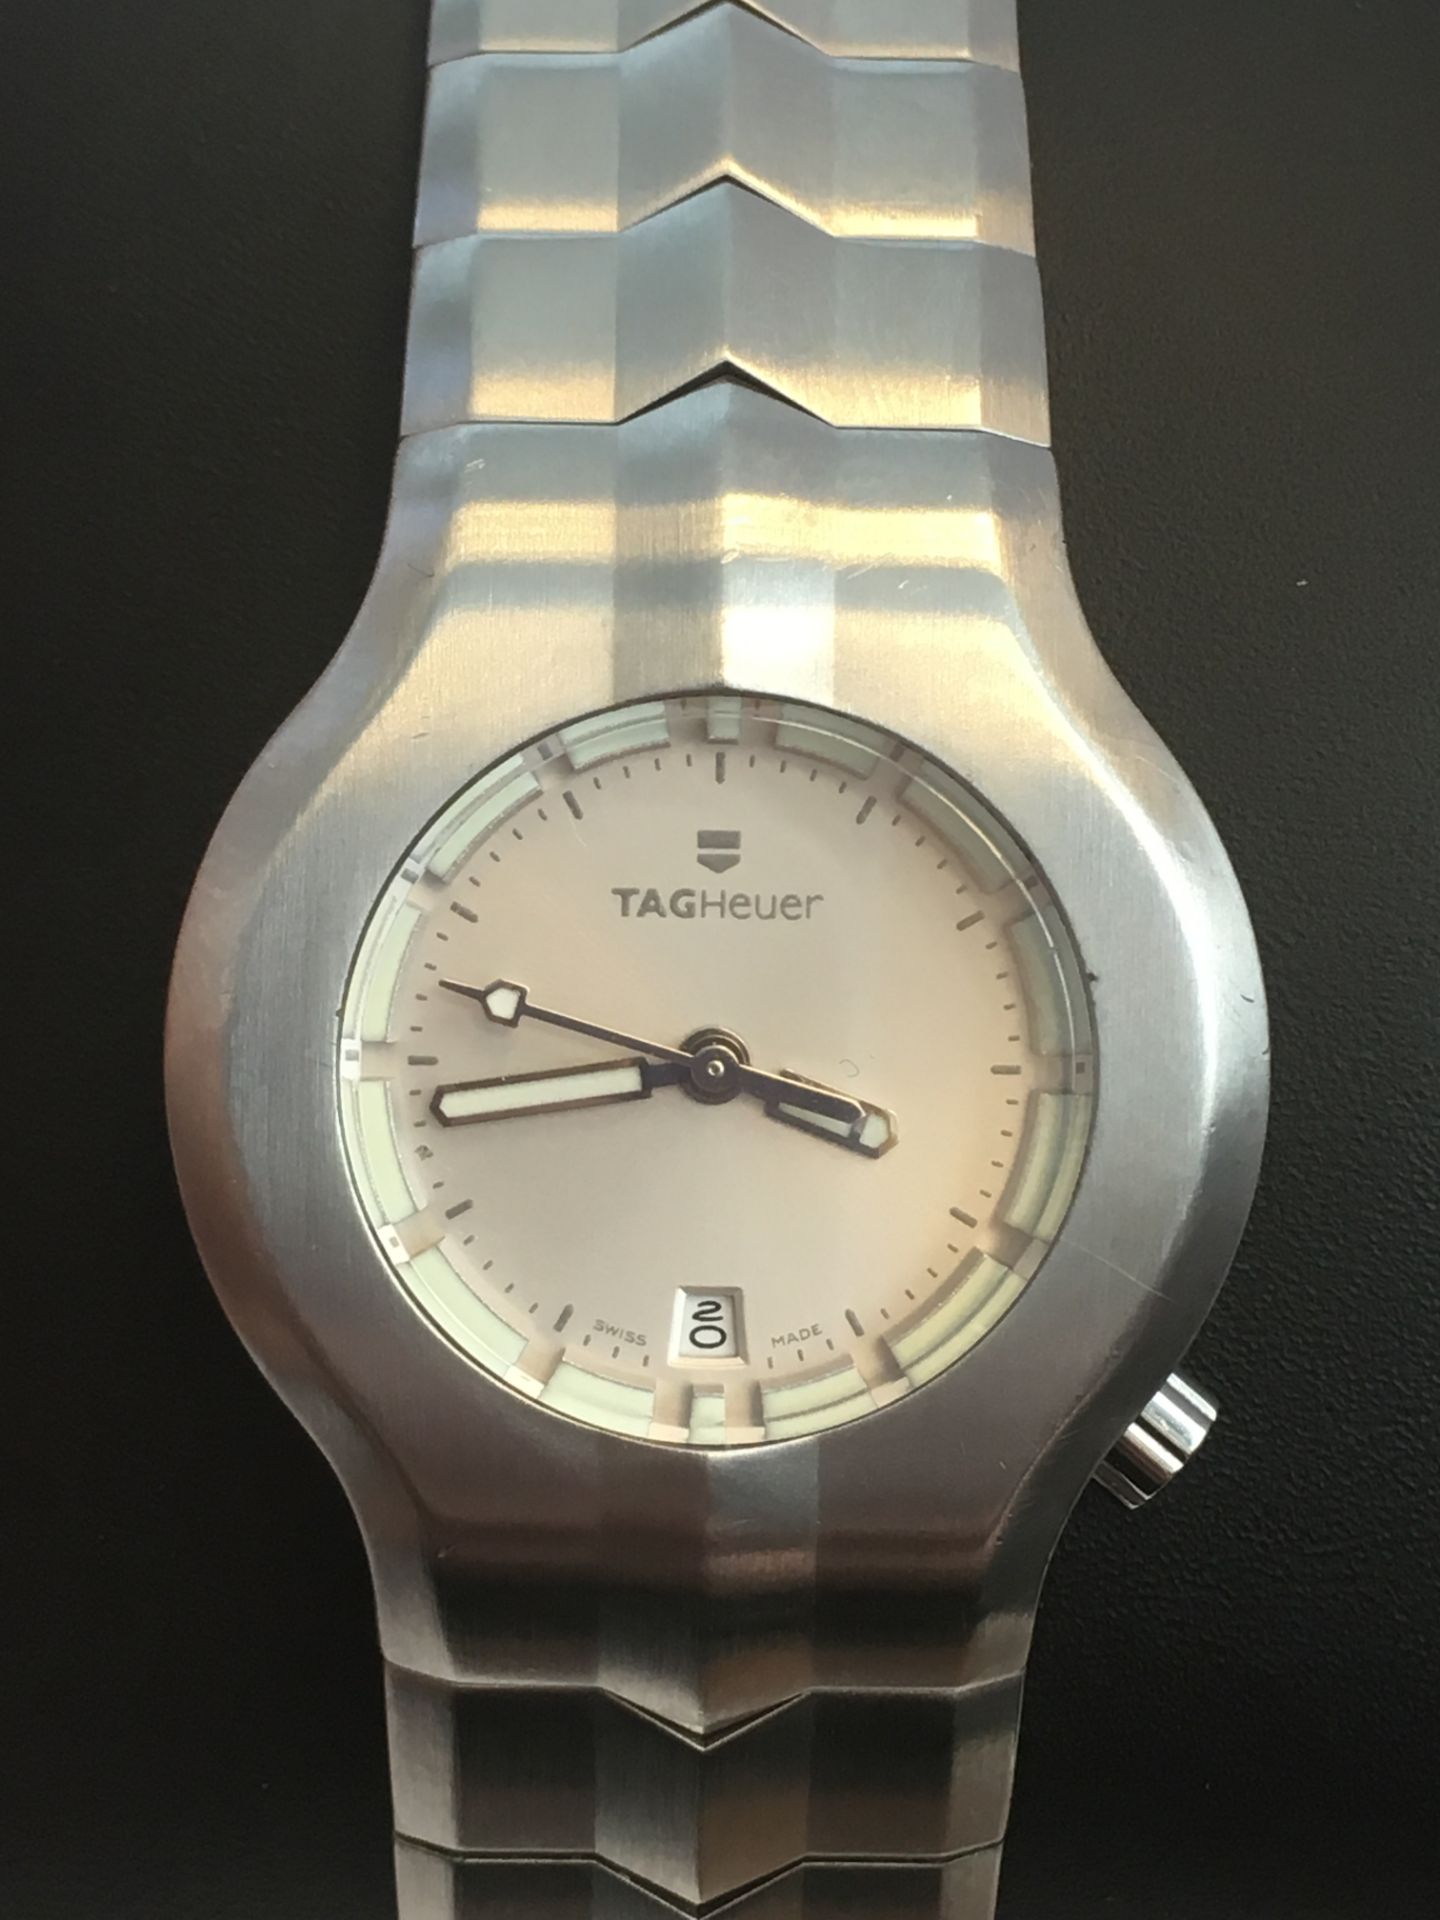 PRE OWNED TAG HEUER ALTER EGO LADIES QUARTZ WATCH - Image 2 of 4